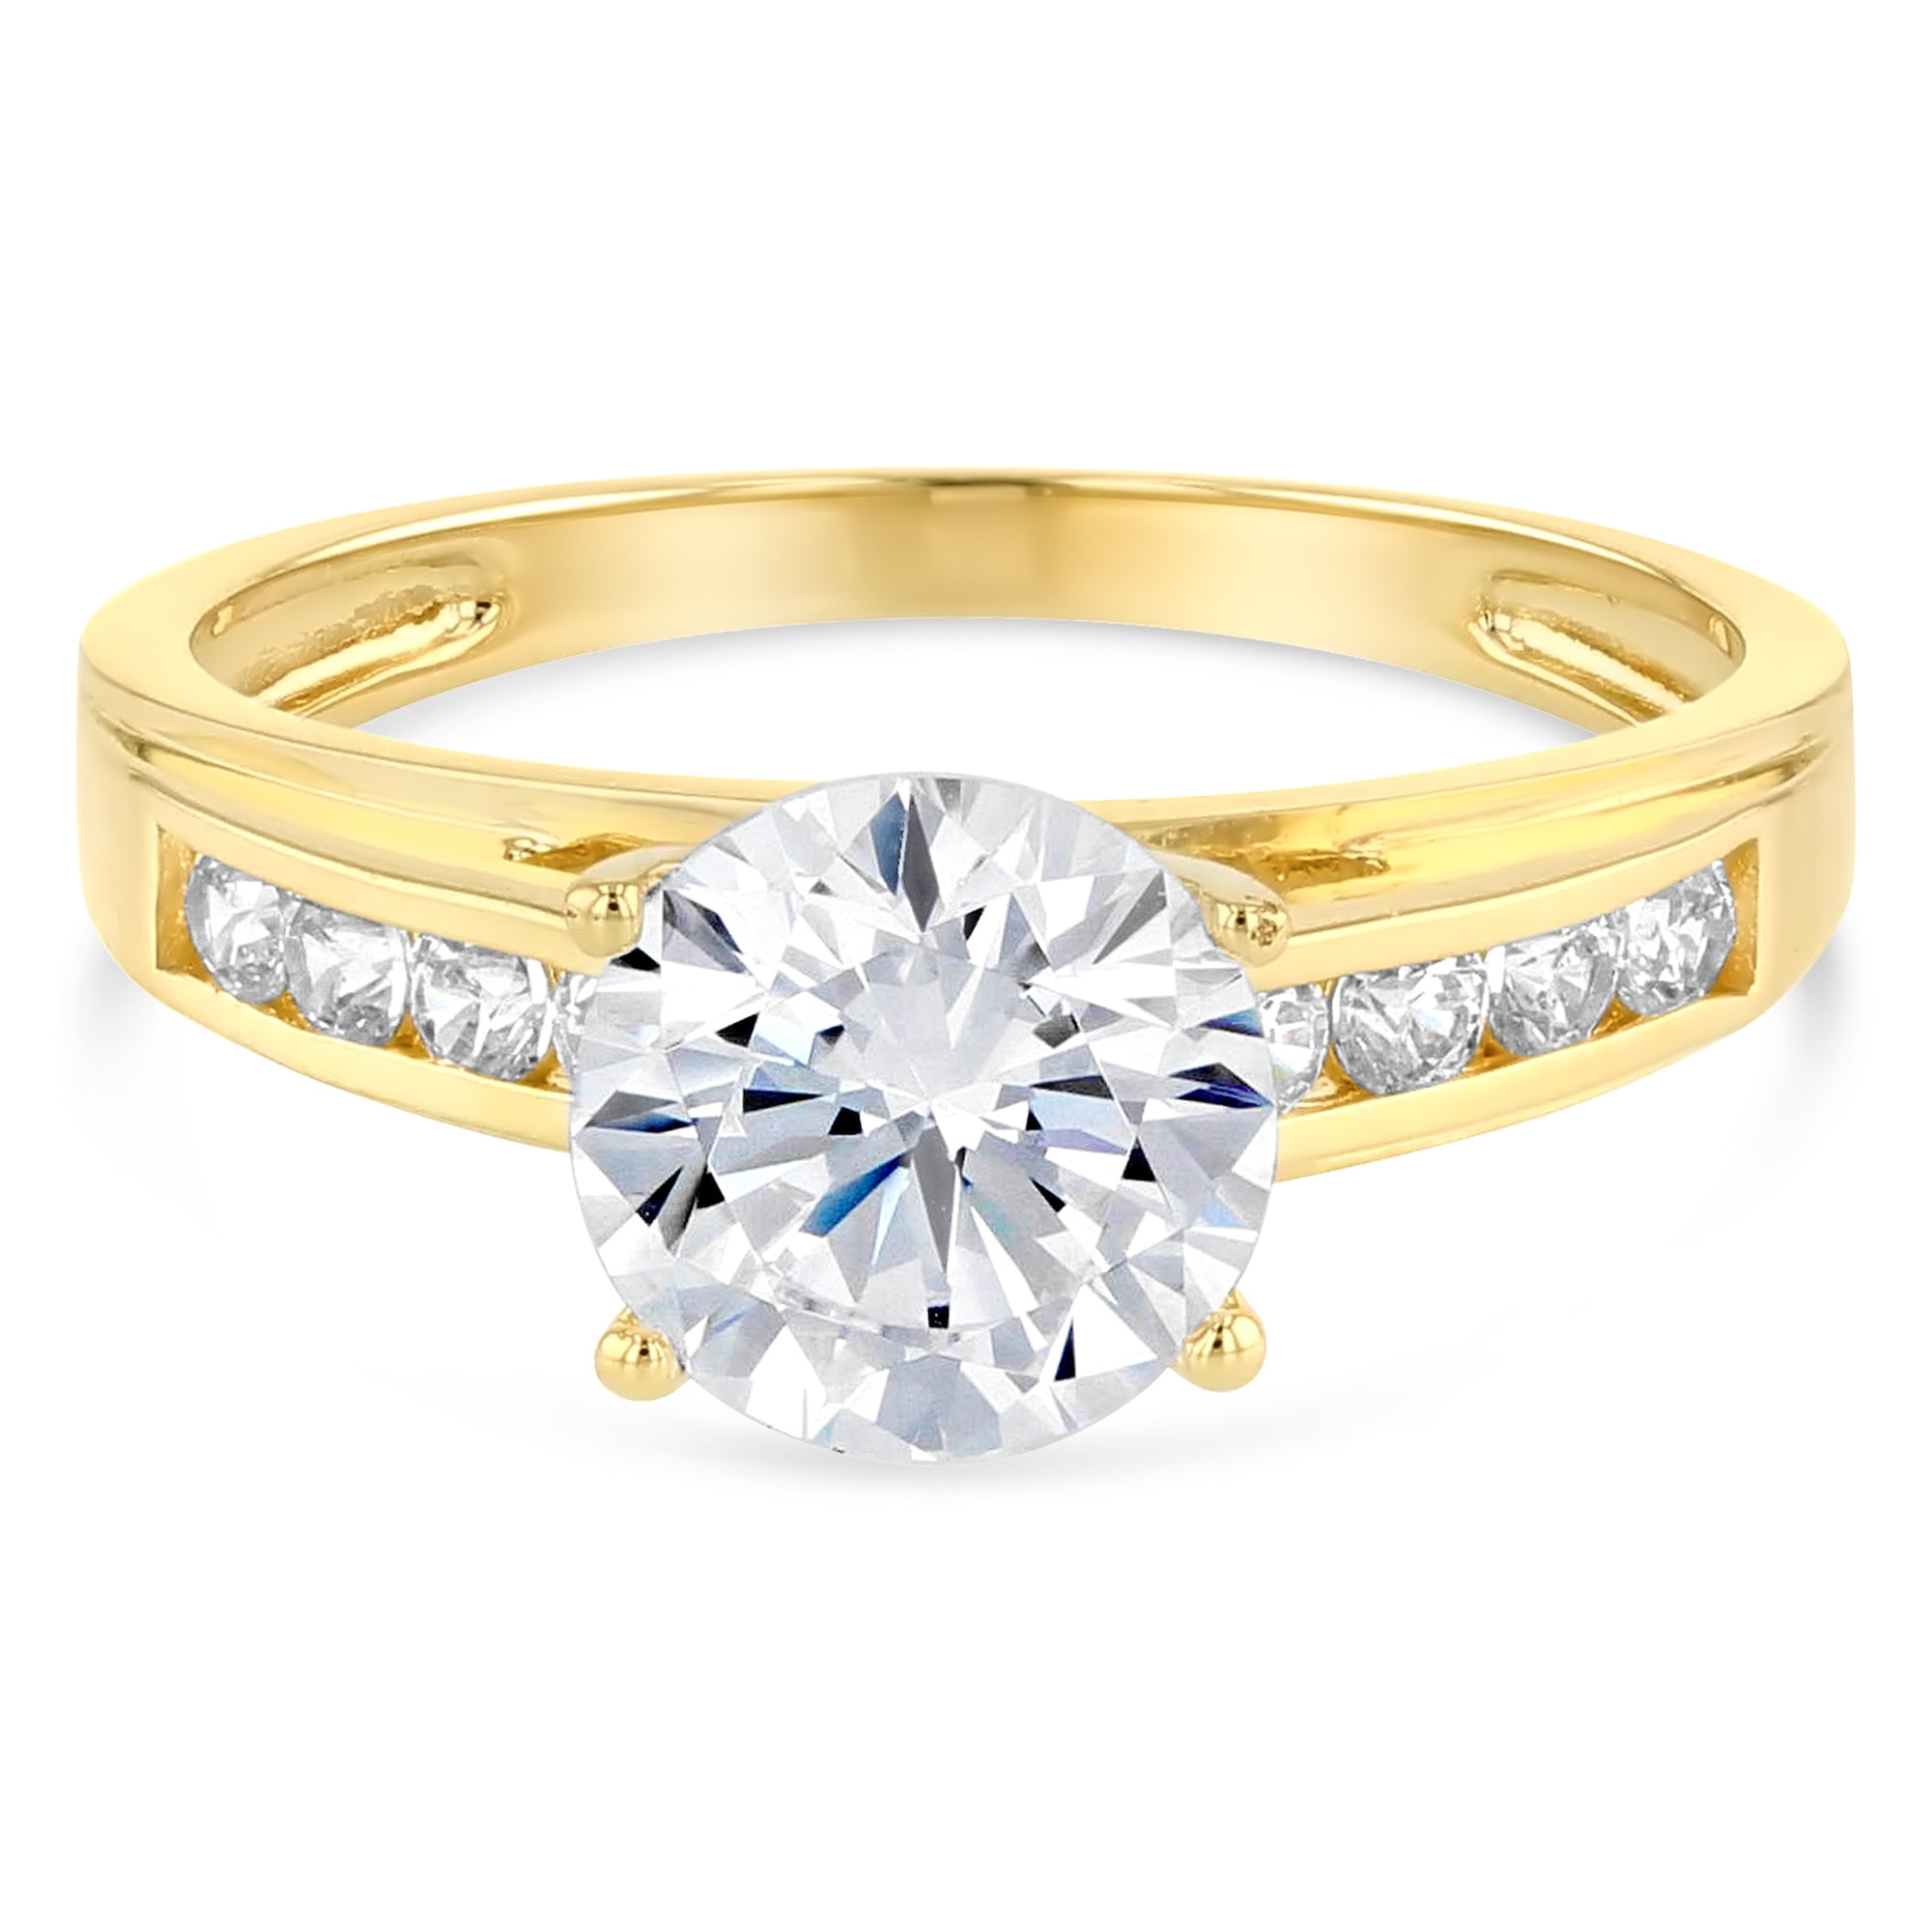 Ioka - Ioka - 14K Yellow Solid Gold 1.5 Ct. Round Cut Solitaire Cubic ...